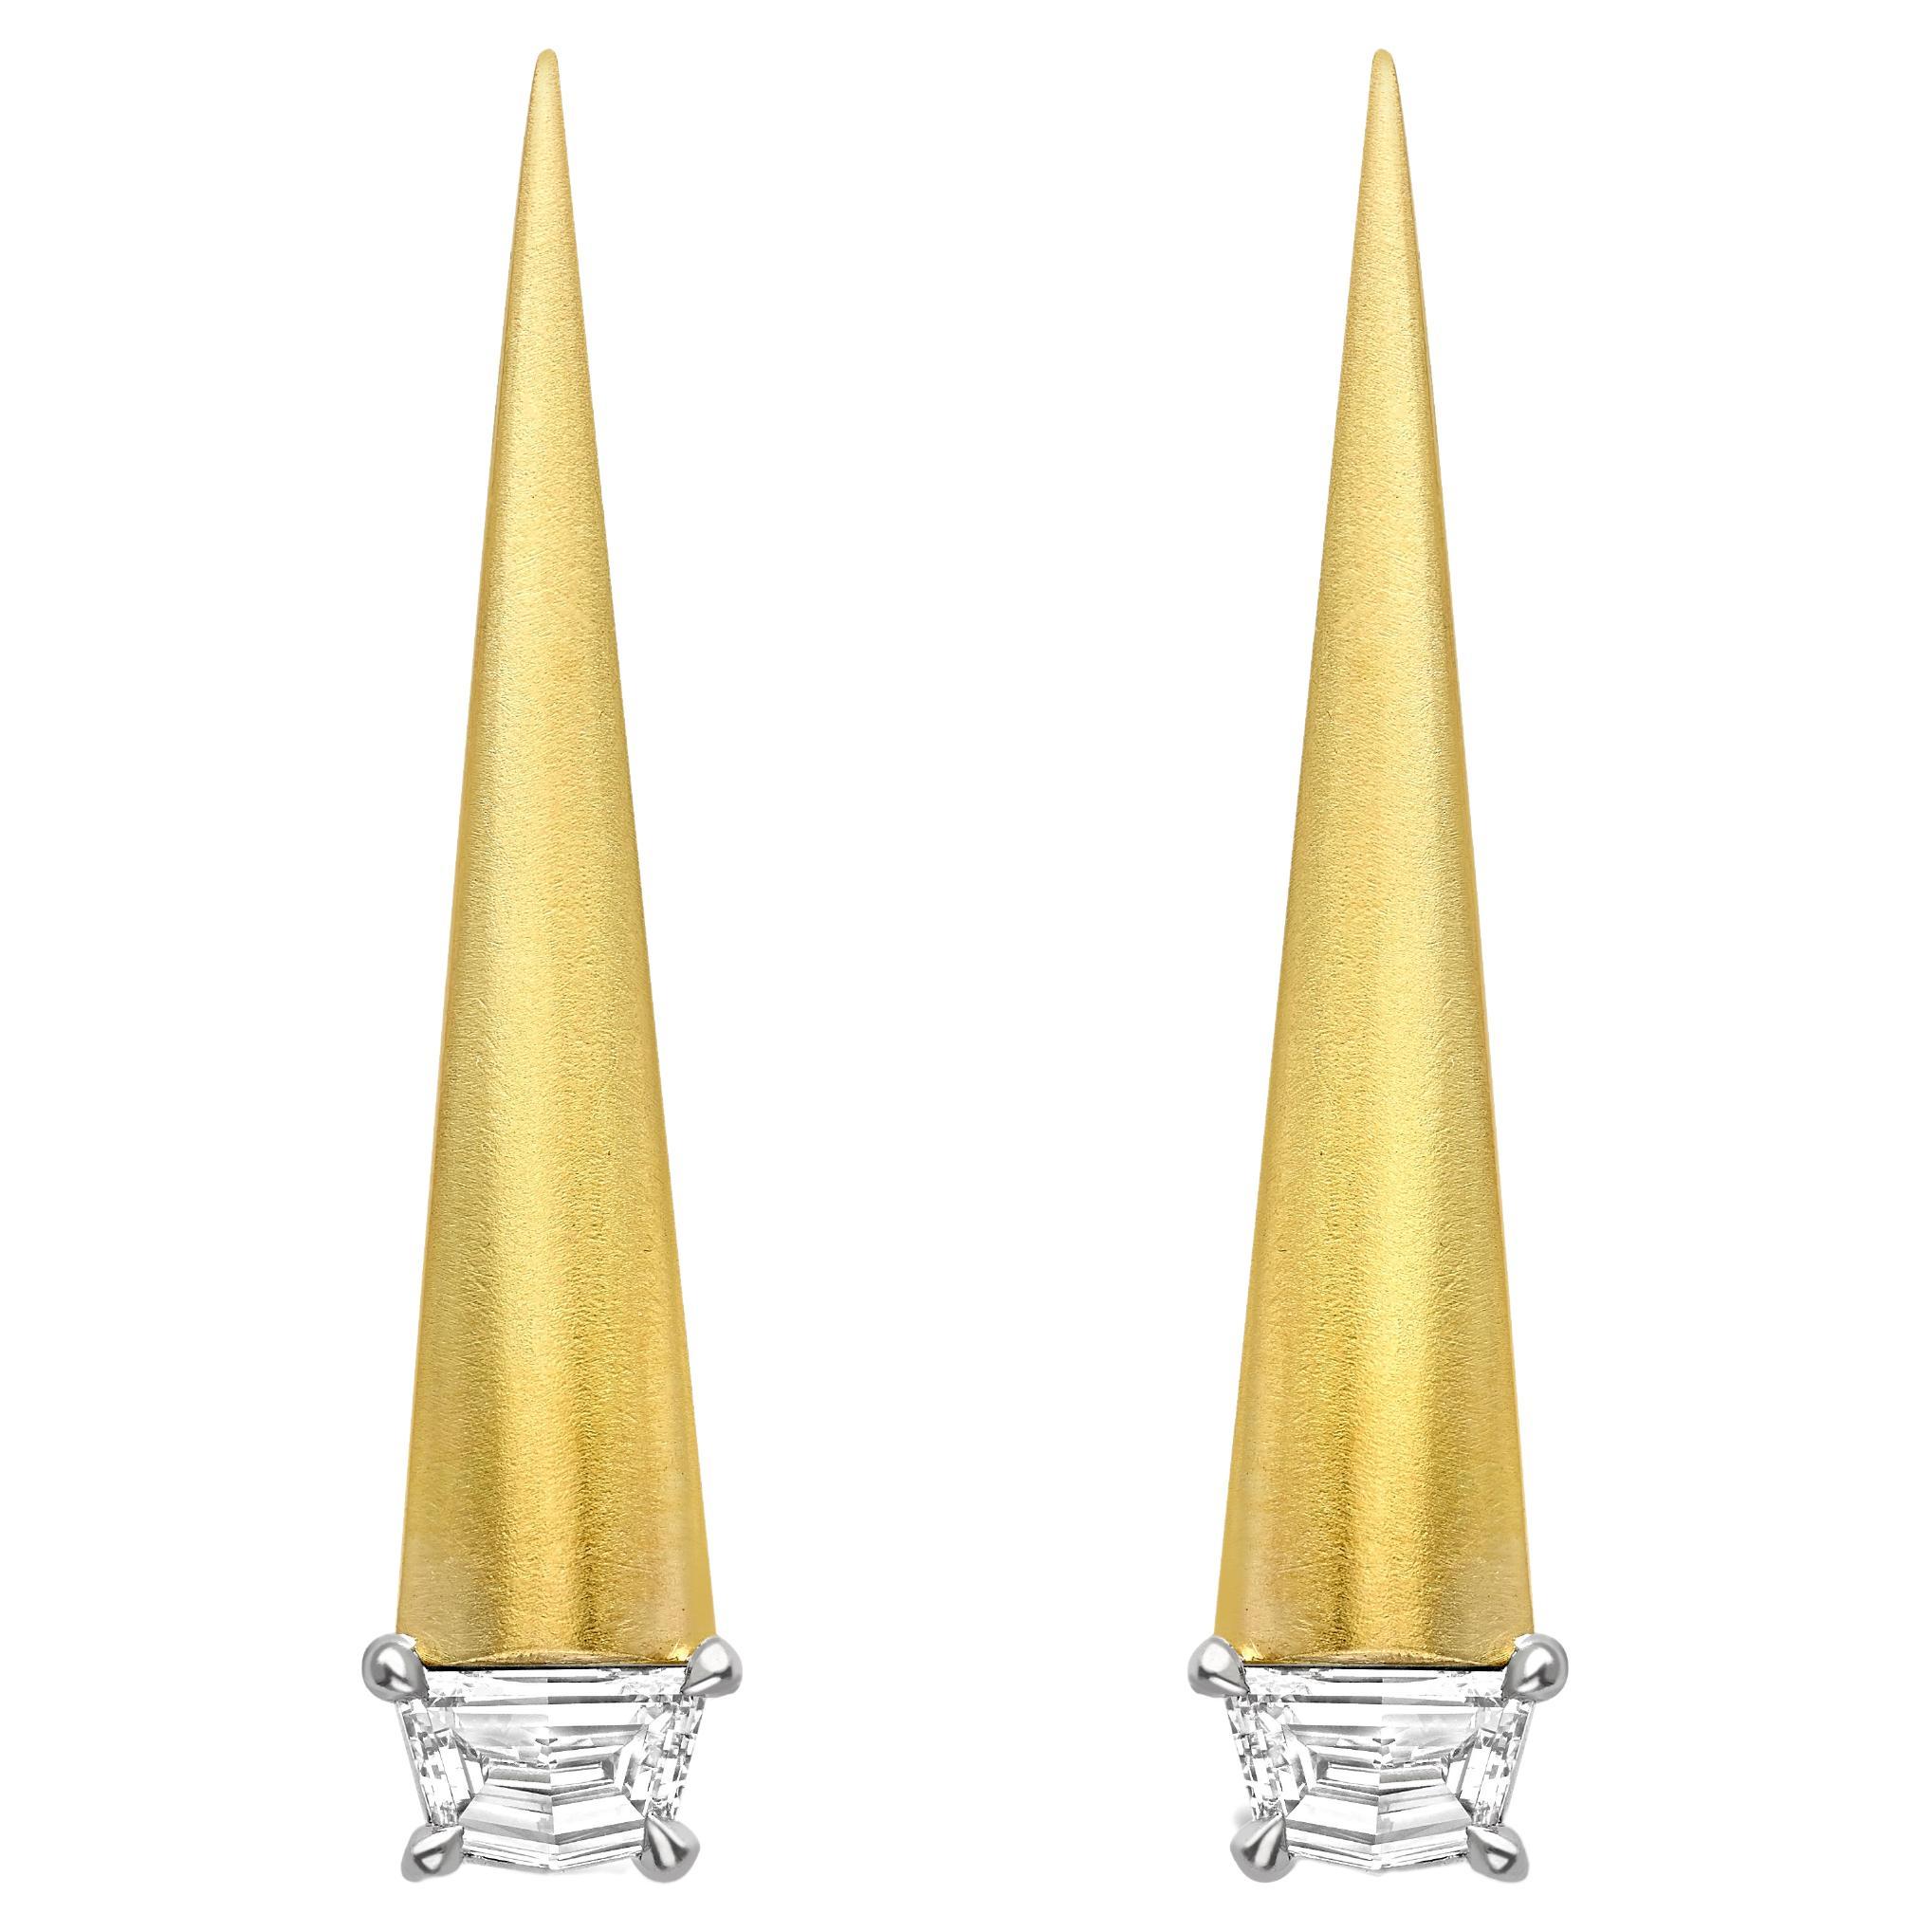 SPEAR TIP EARRINGS Yellow gold with Cadillac cut diamonds by Liv Luttrell